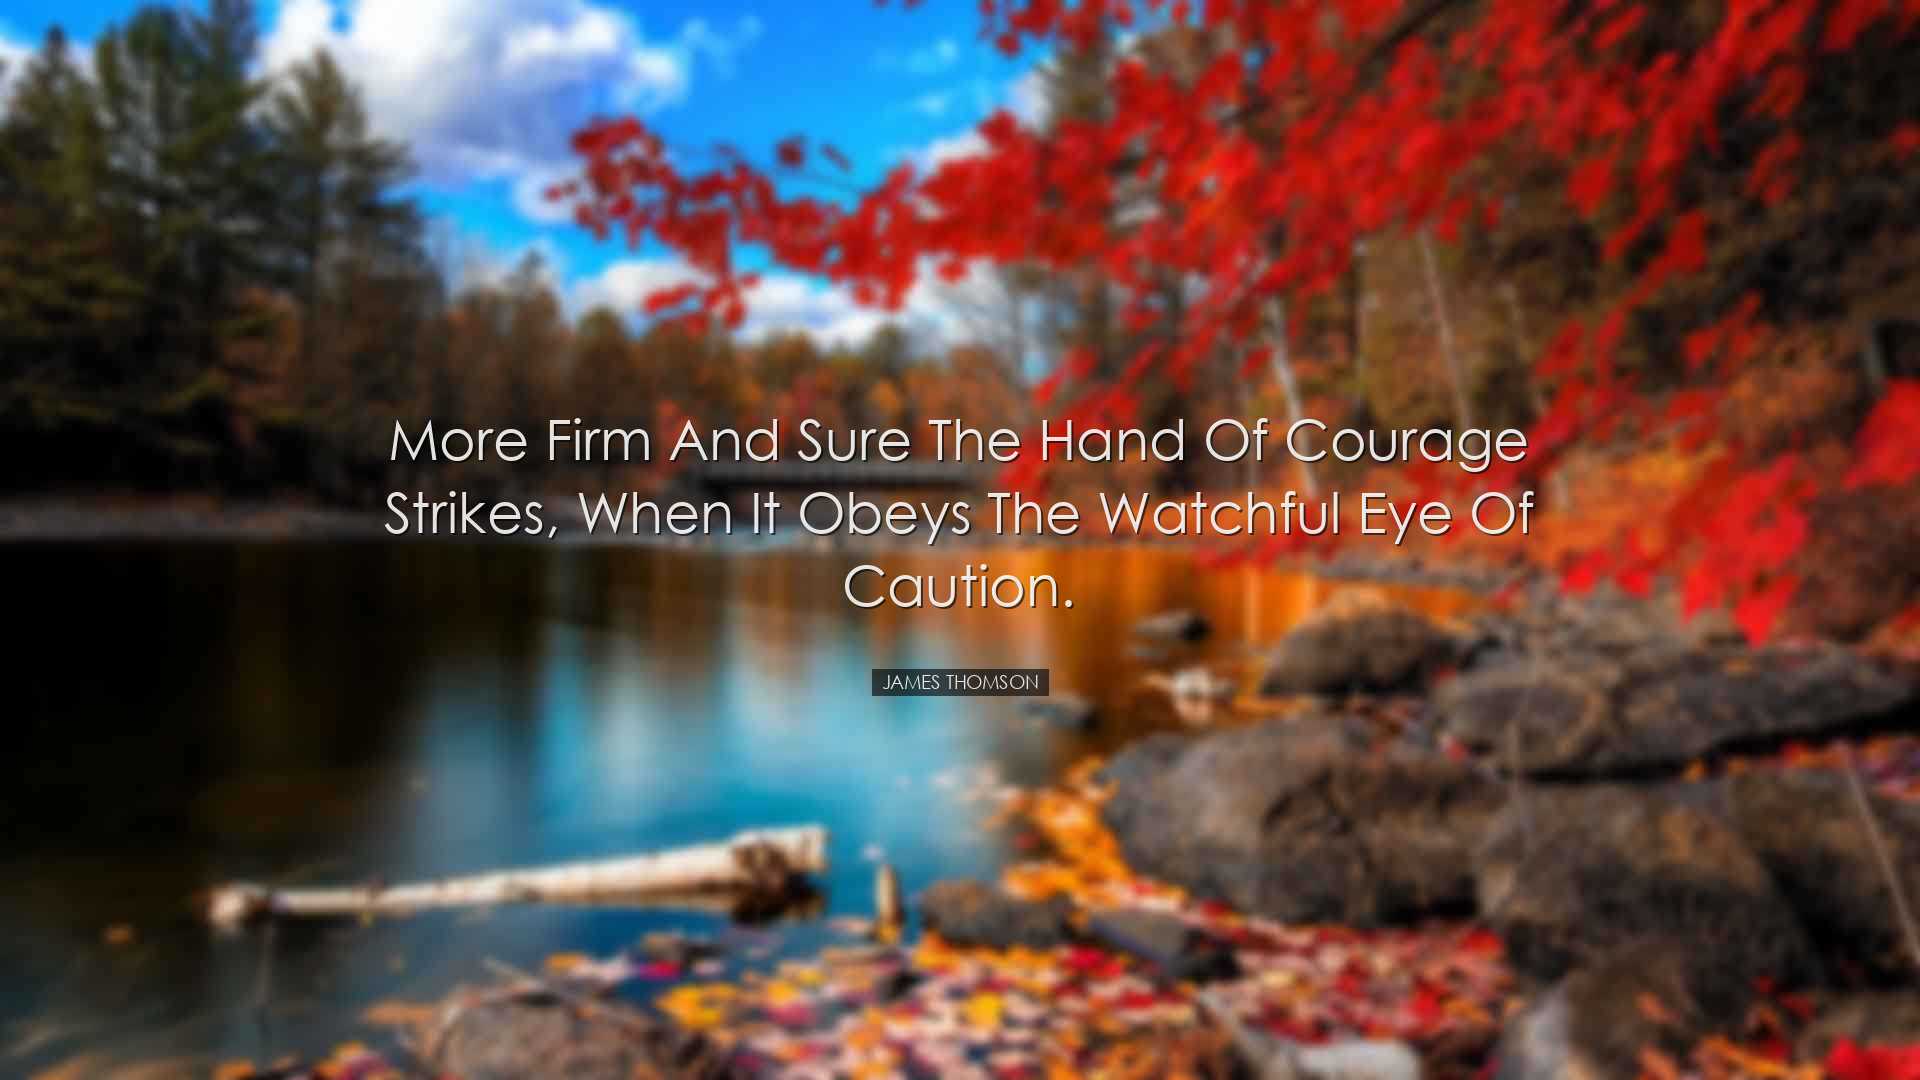 More firm and sure the hand of courage strikes, when it obeys the